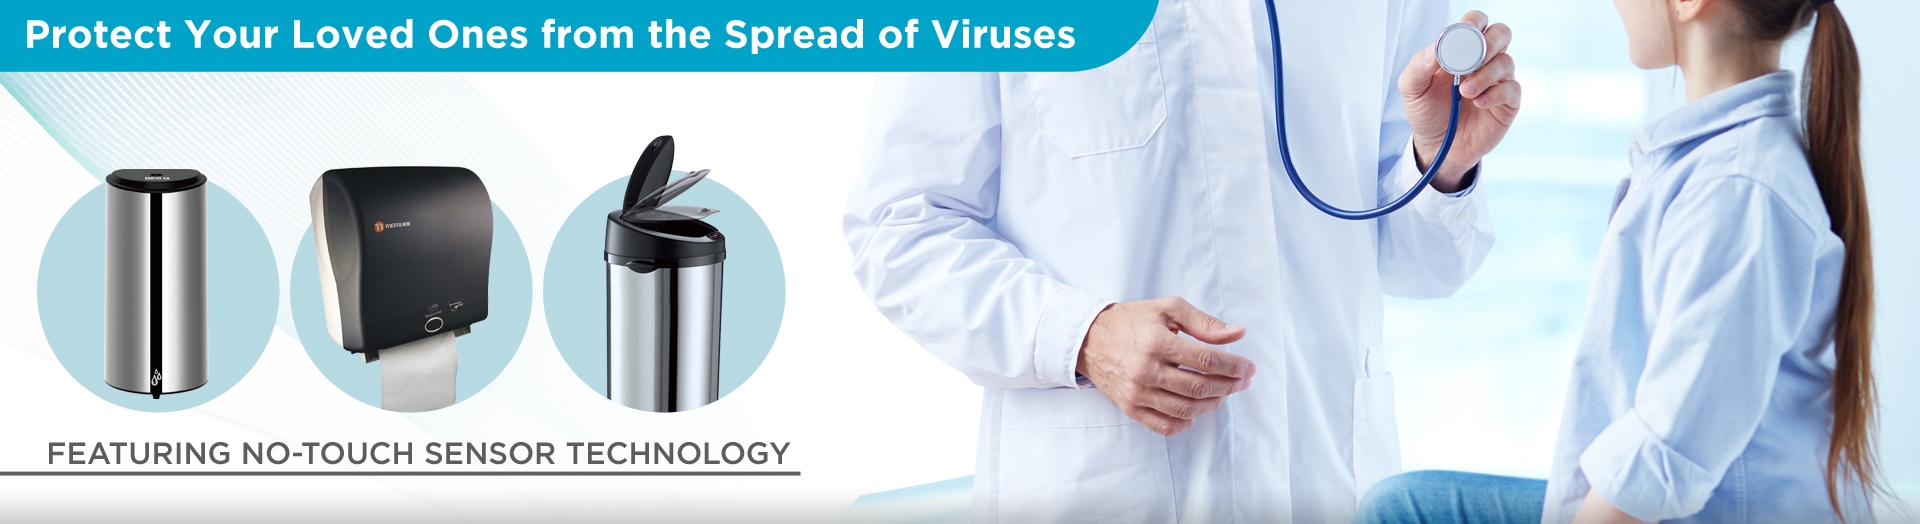 Protect Your Loved Ones from the Spread of Viruses